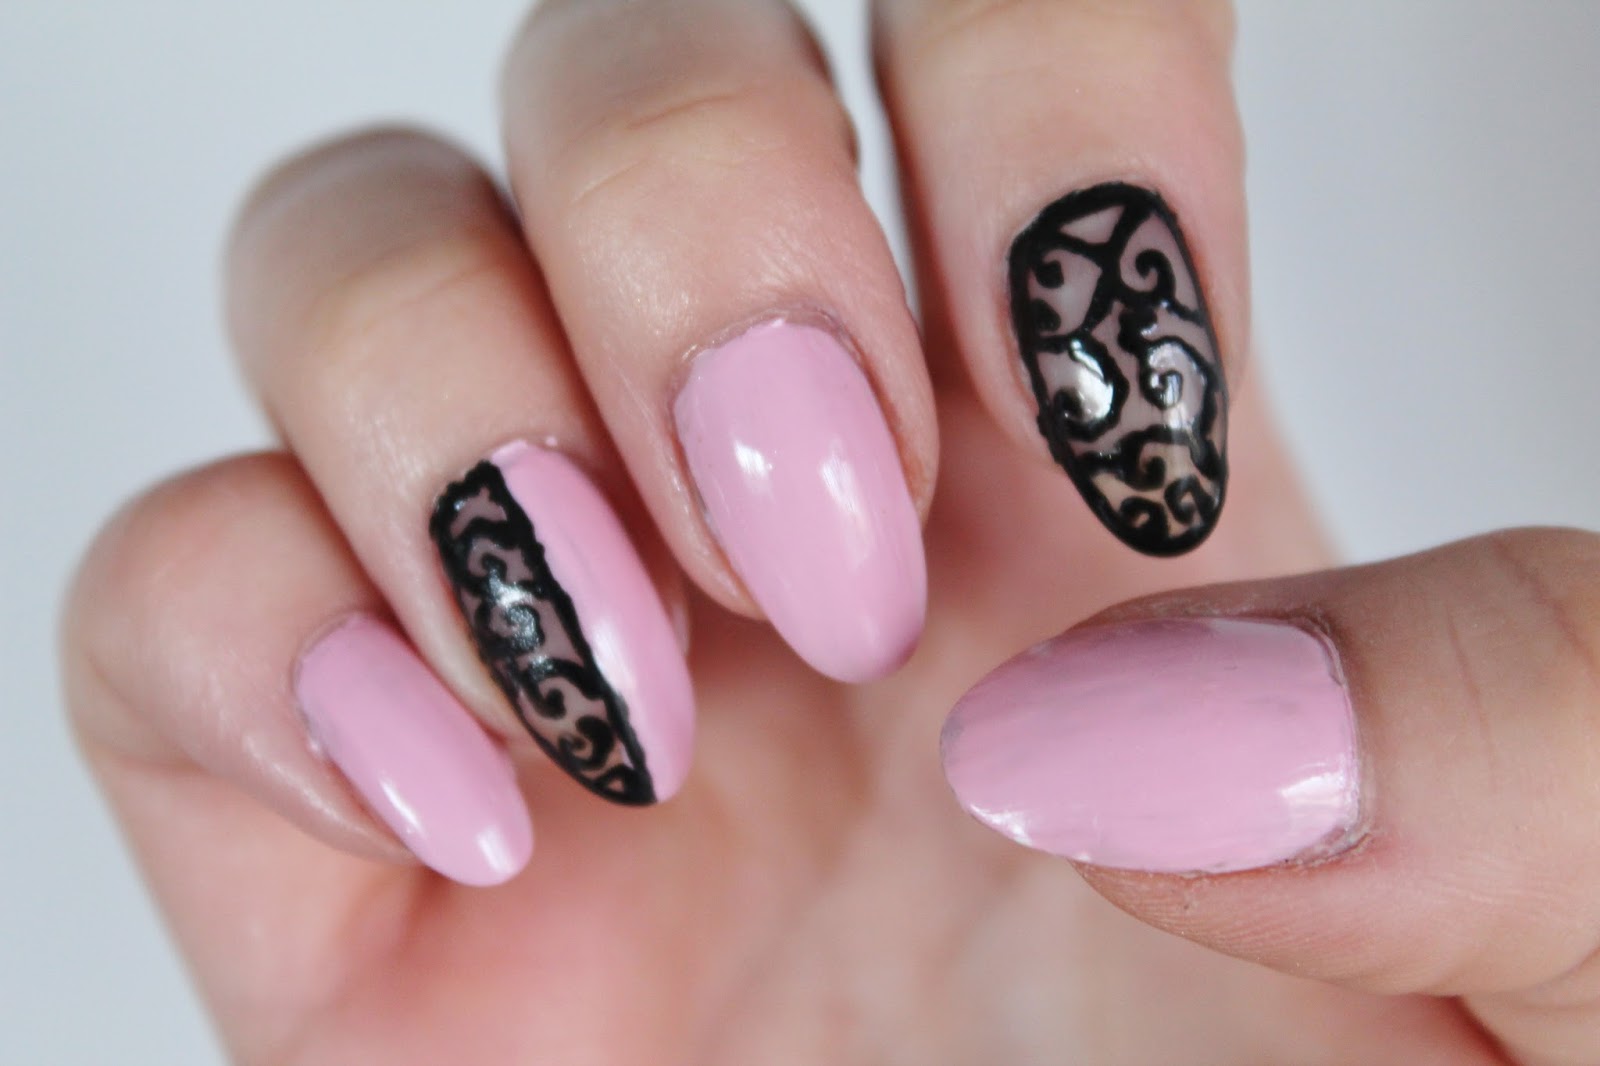 9. Negative Space Nail Art with Lines - wide 9